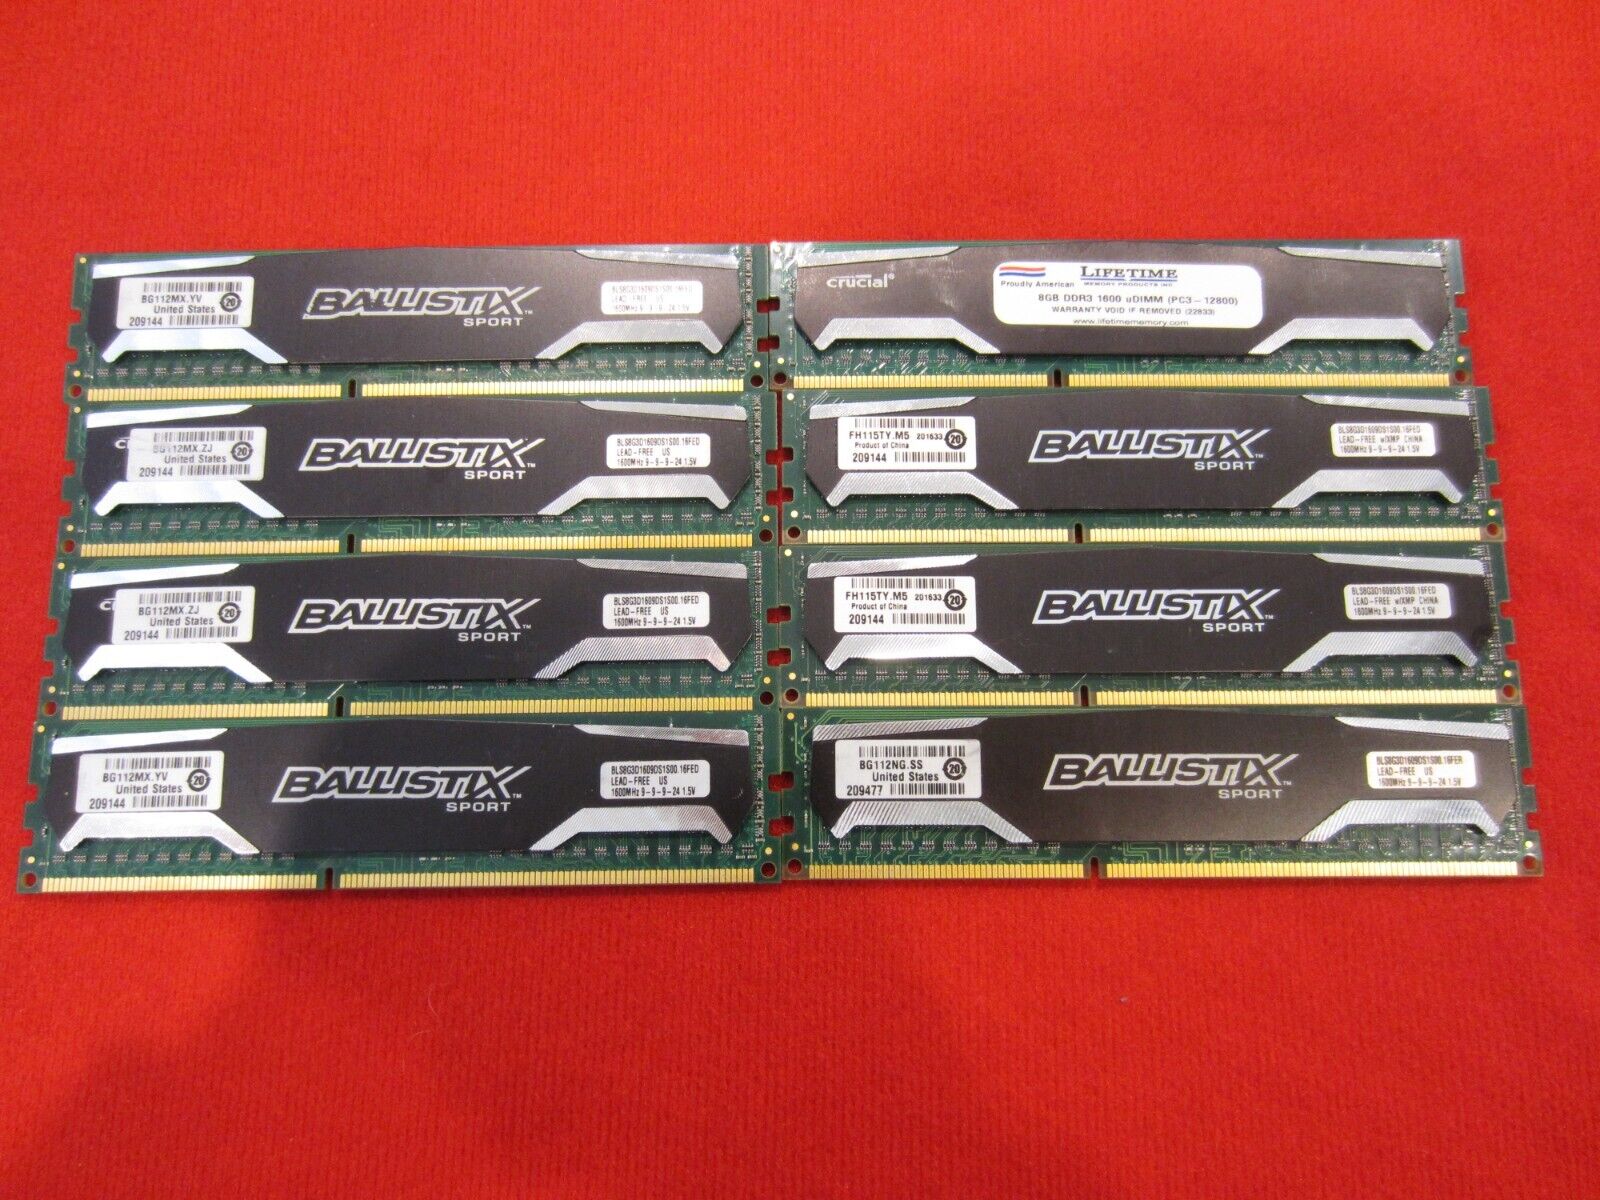 Lot of 8pcs Crucial 8GB PC3-12800 DDR3-1600Mhz Udimm Memory